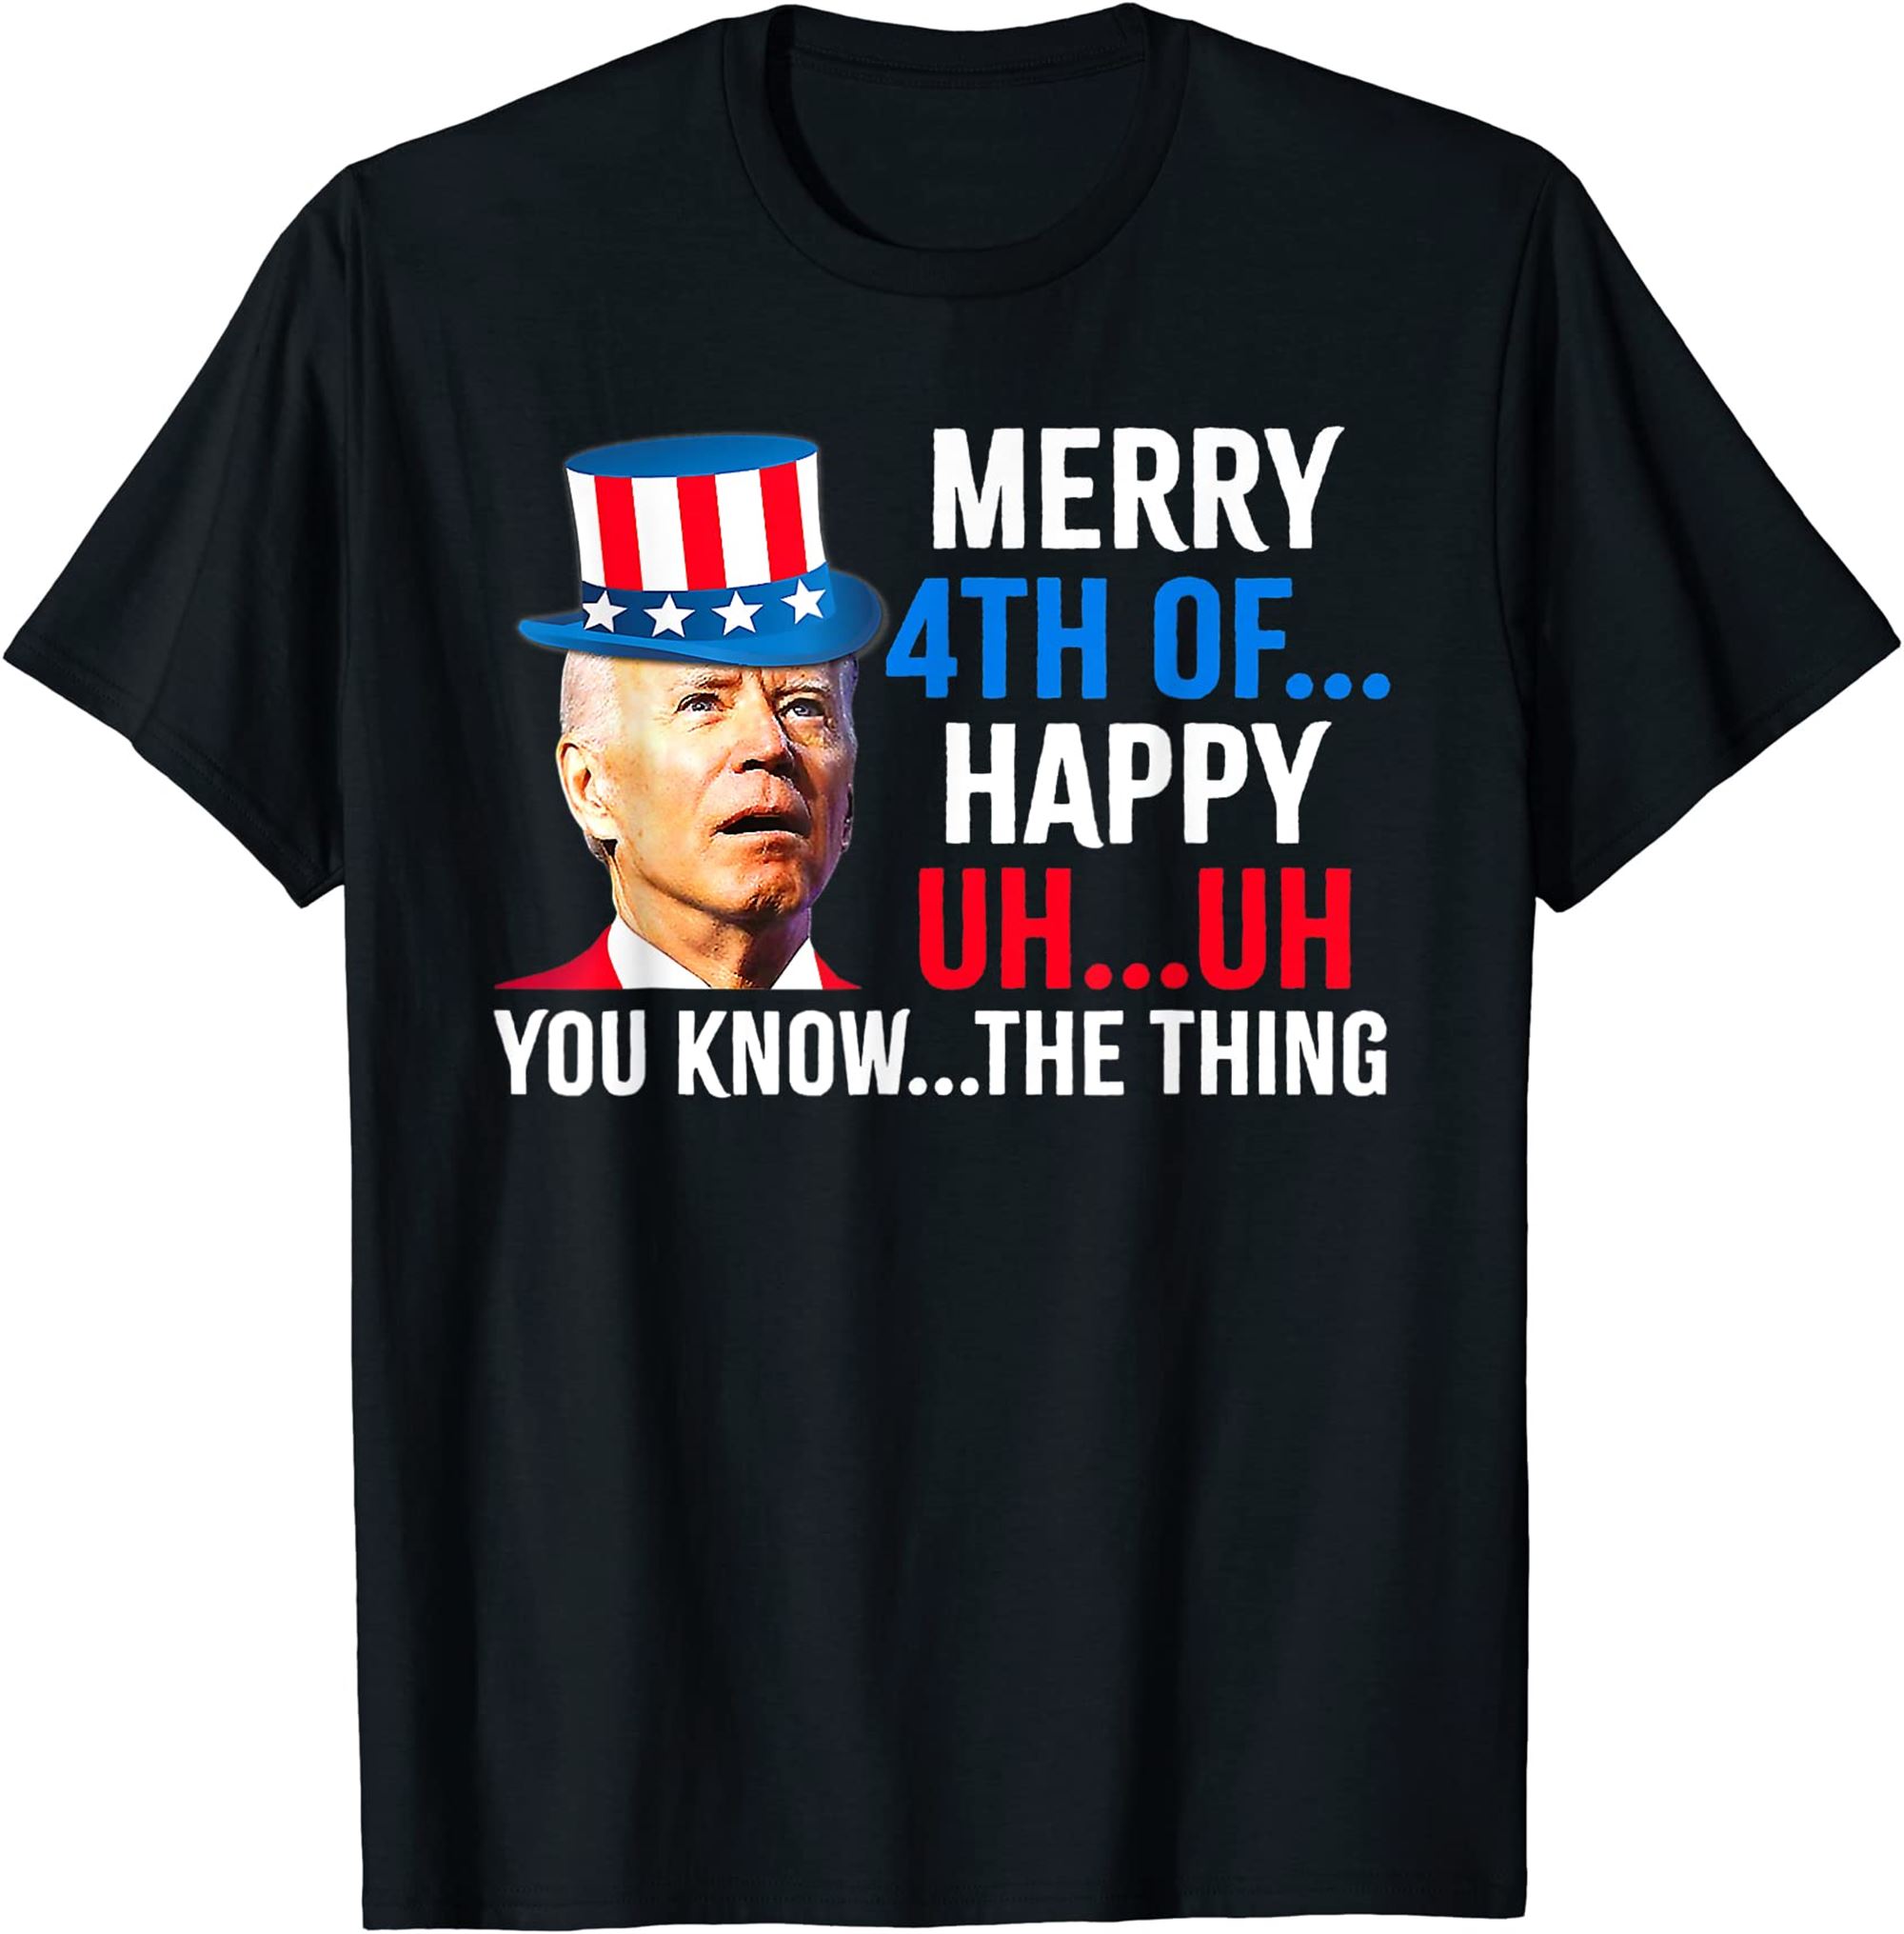 Joe Biden Confused Merry Happy Funny 4th Of July T-shirt Size Up To 5xl